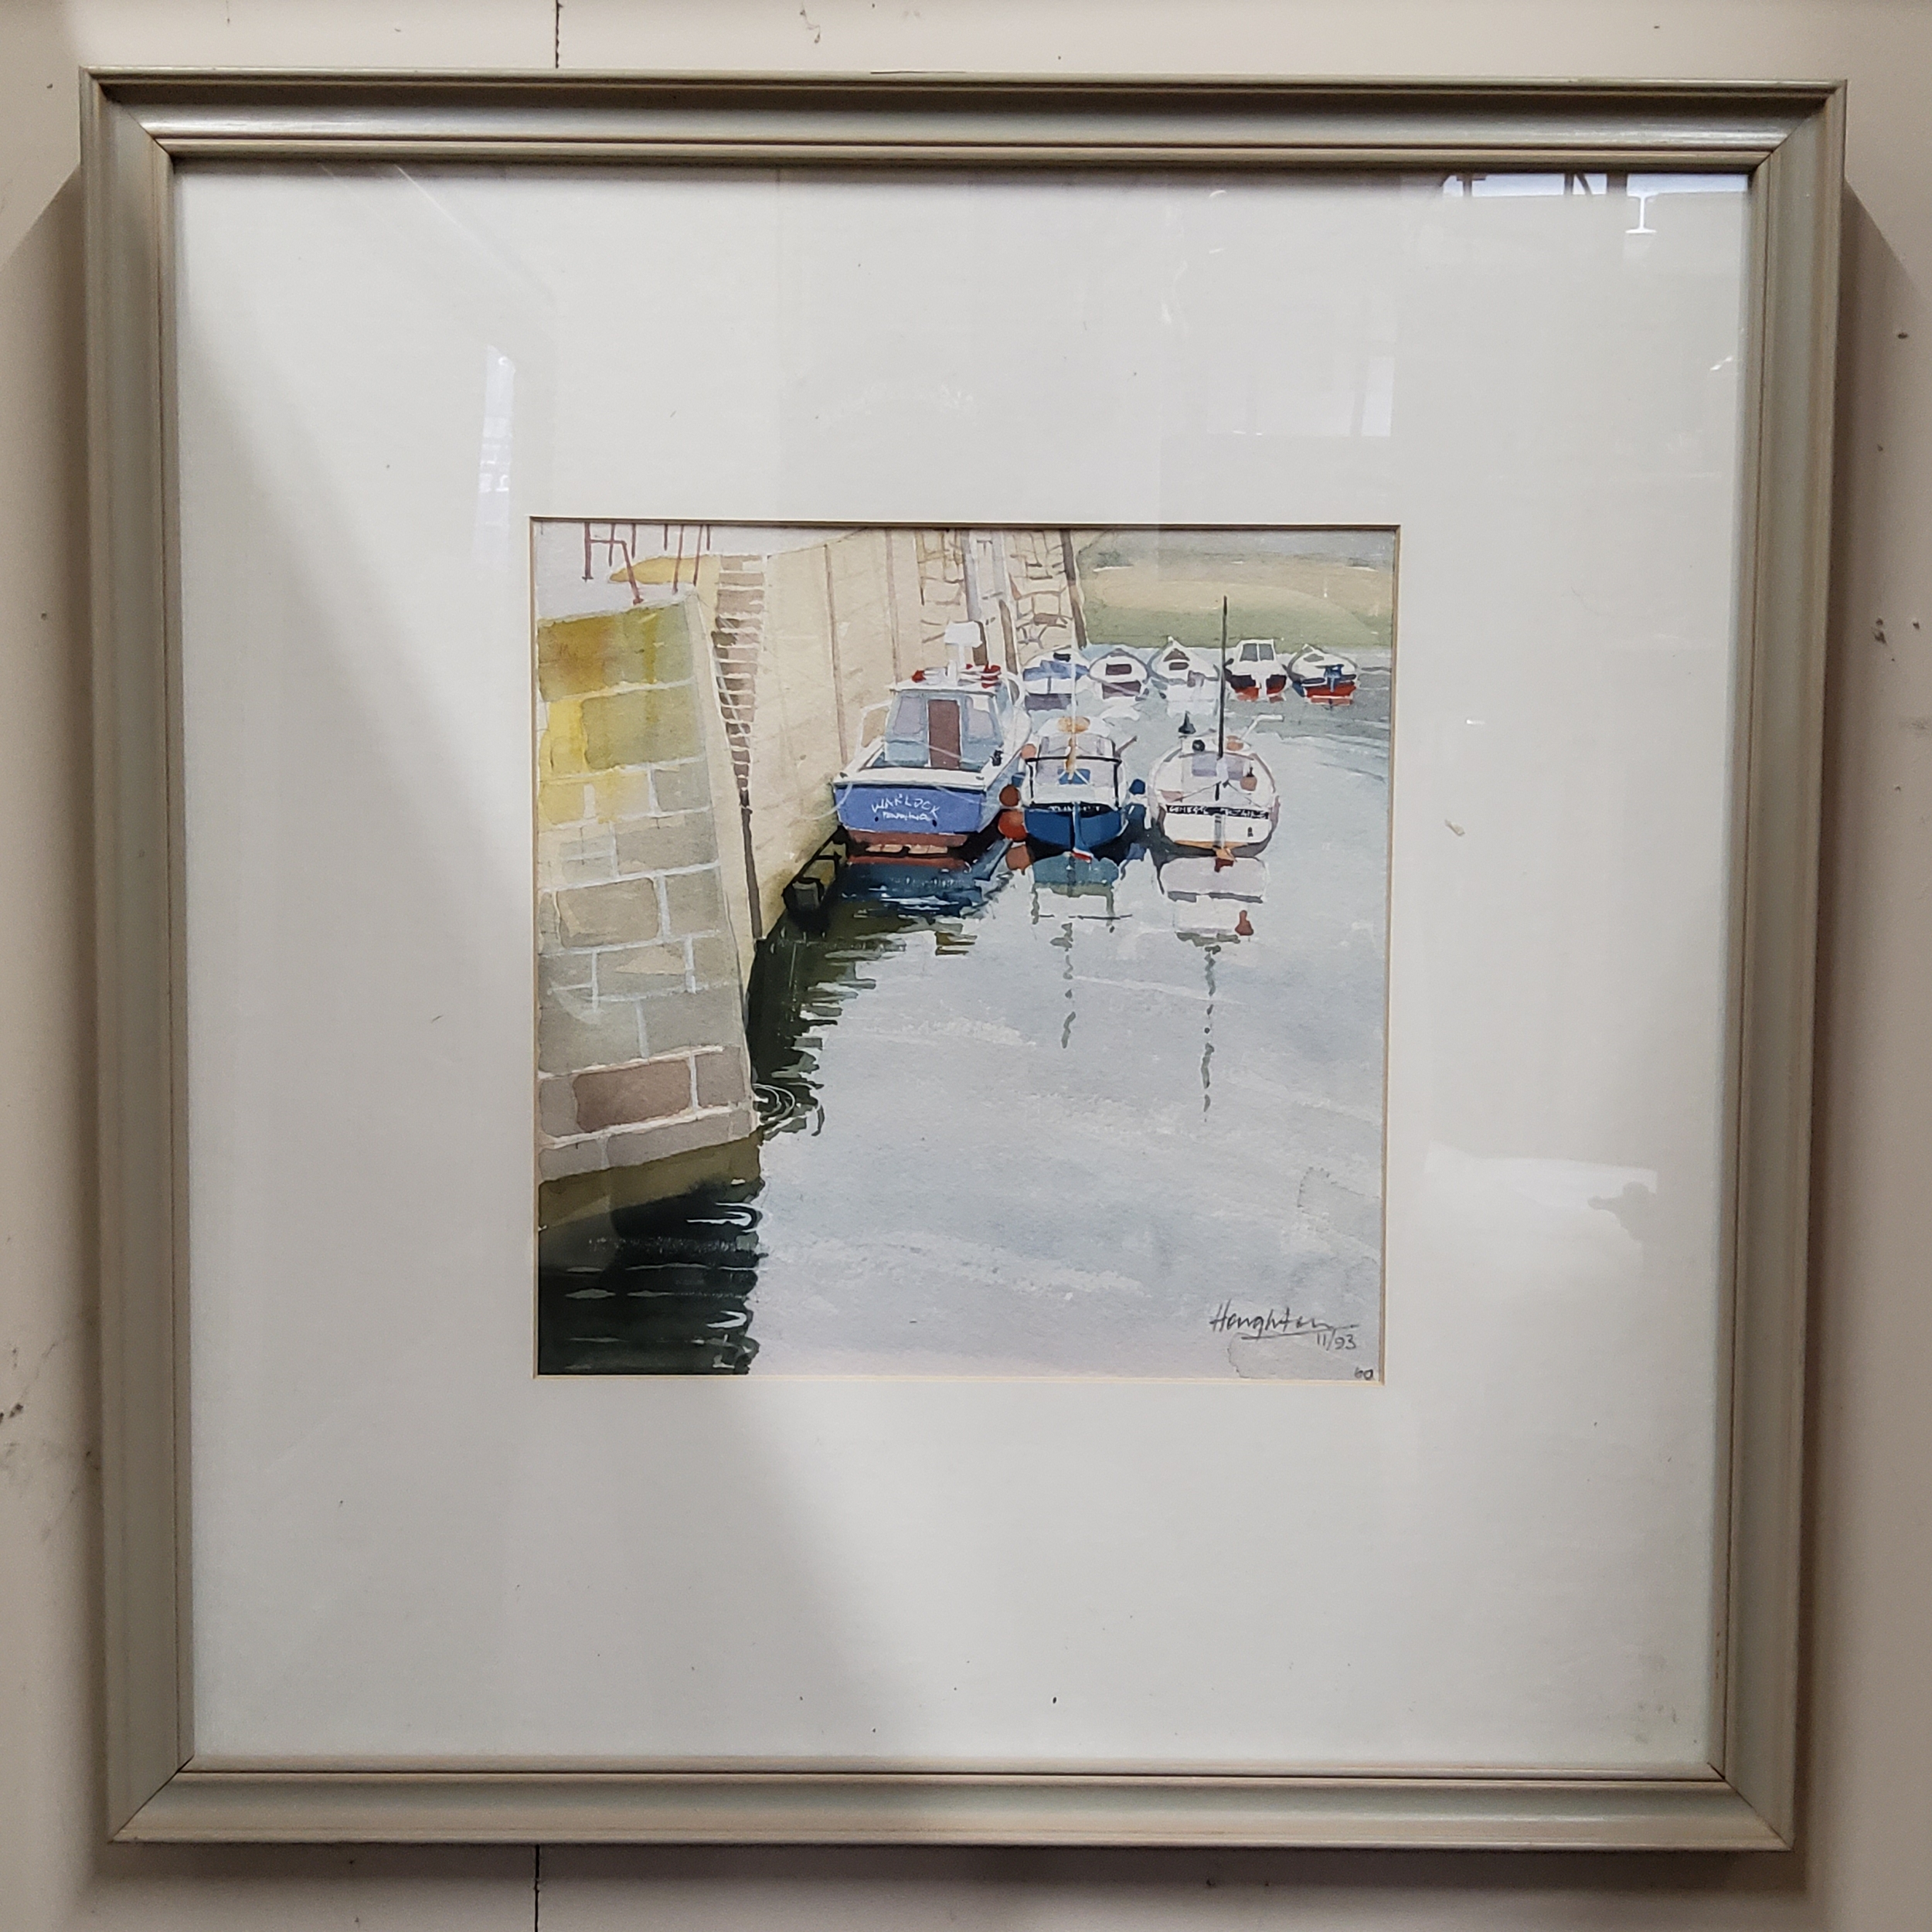 Tony Houghton (Sheffield Artist) Mousehole Reflections, signed in pencil, dated 11/93, watercolour - Image 2 of 2